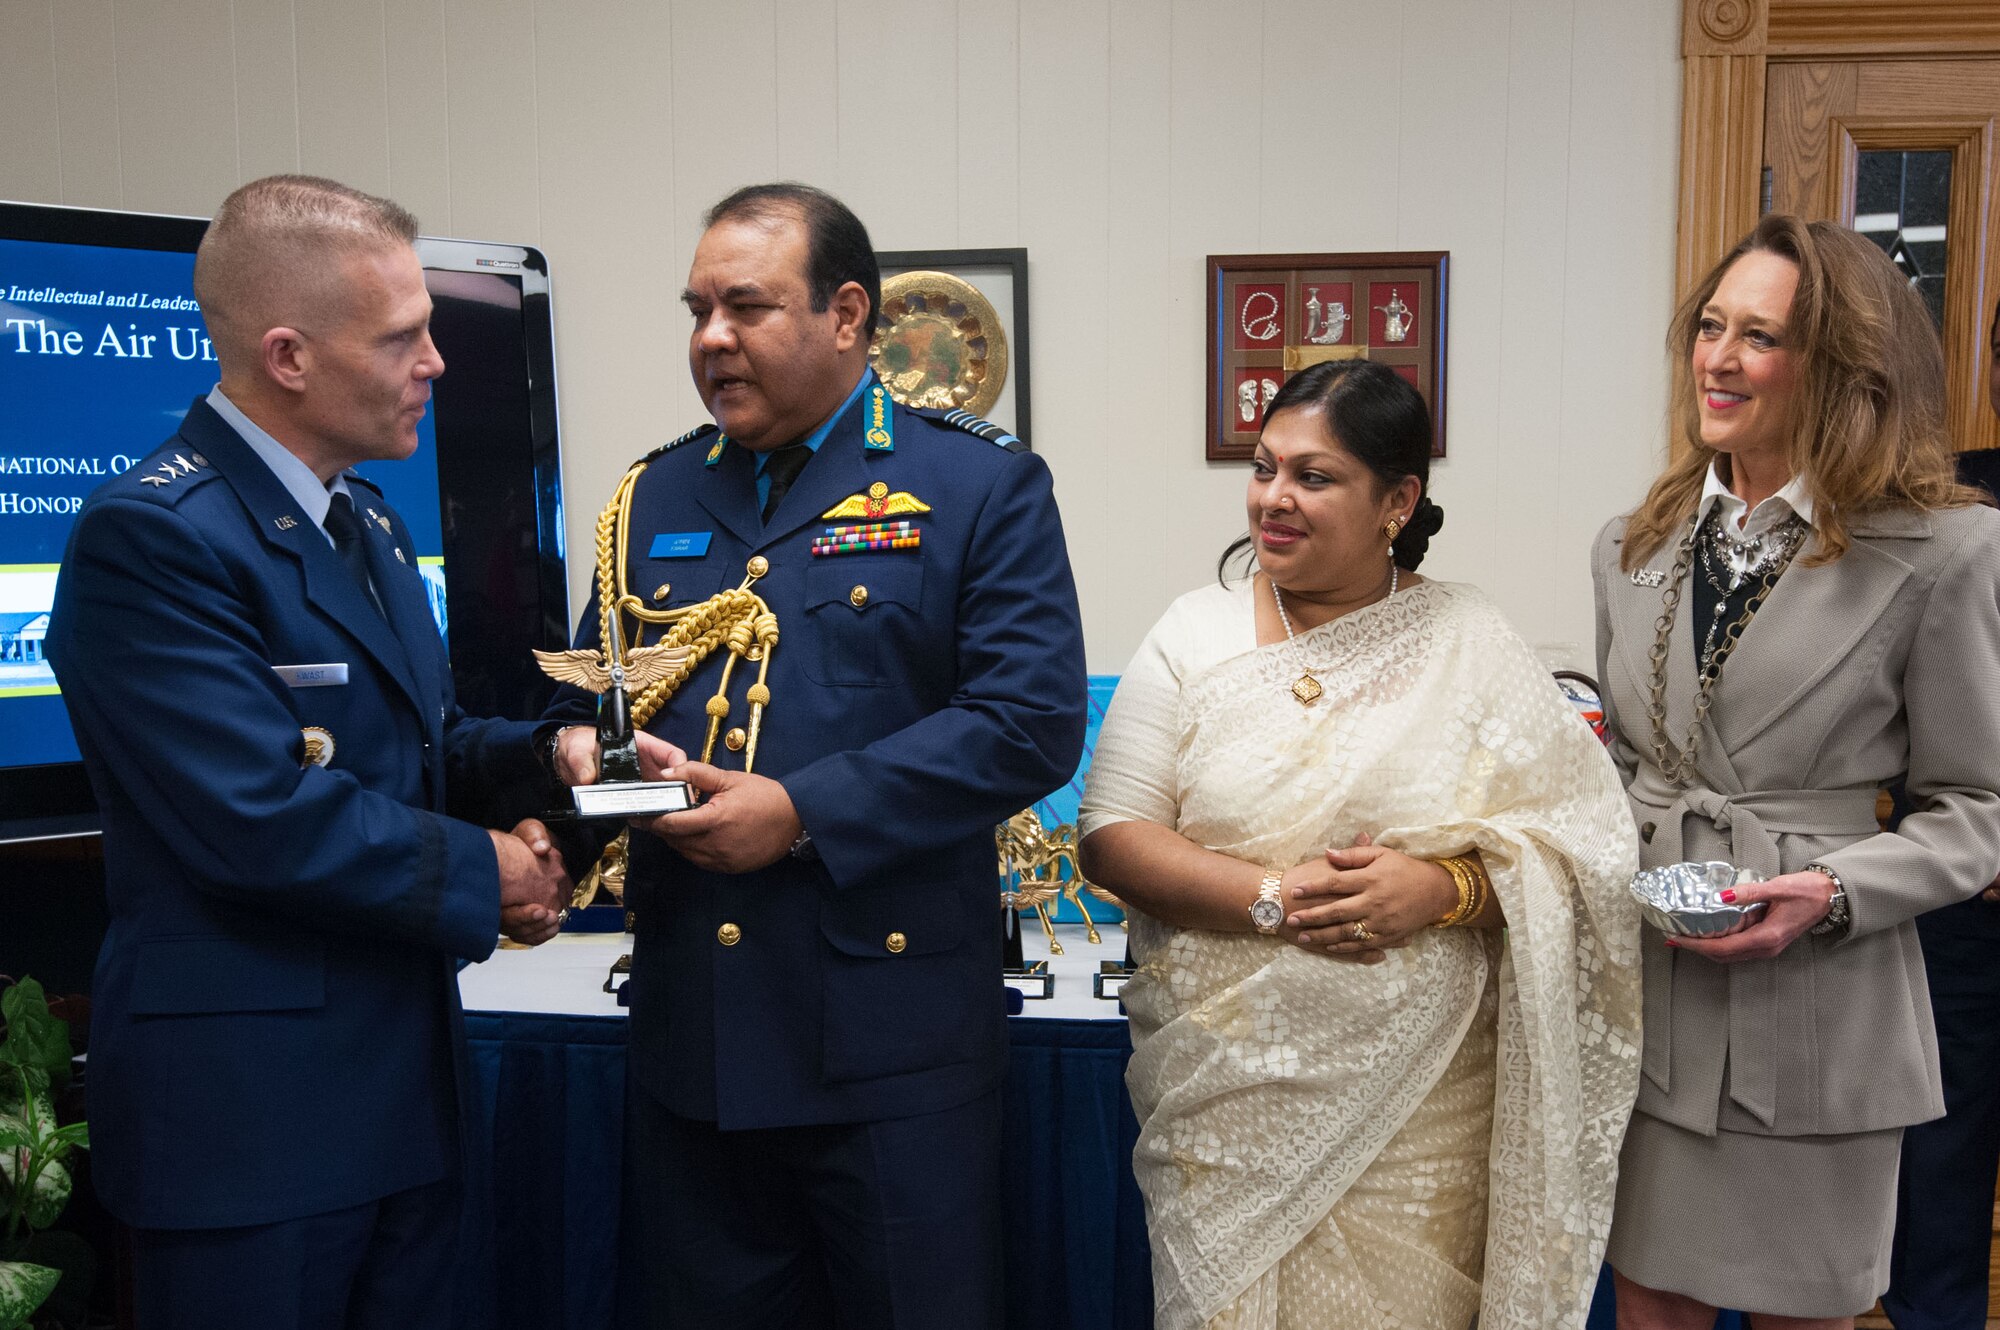 Air Force Lt. Gen. Steven Kwast, Air University commander and president, presents an award to a student attending the International Officer School at the Carl A. Spaatz Center for Officer Education, Feb. 3, 2016. The international officers receive the awards to honor select alumni who have attained prominent positions in their countries. The selection of each award is based on input from the embassy of the individuals’ country. 